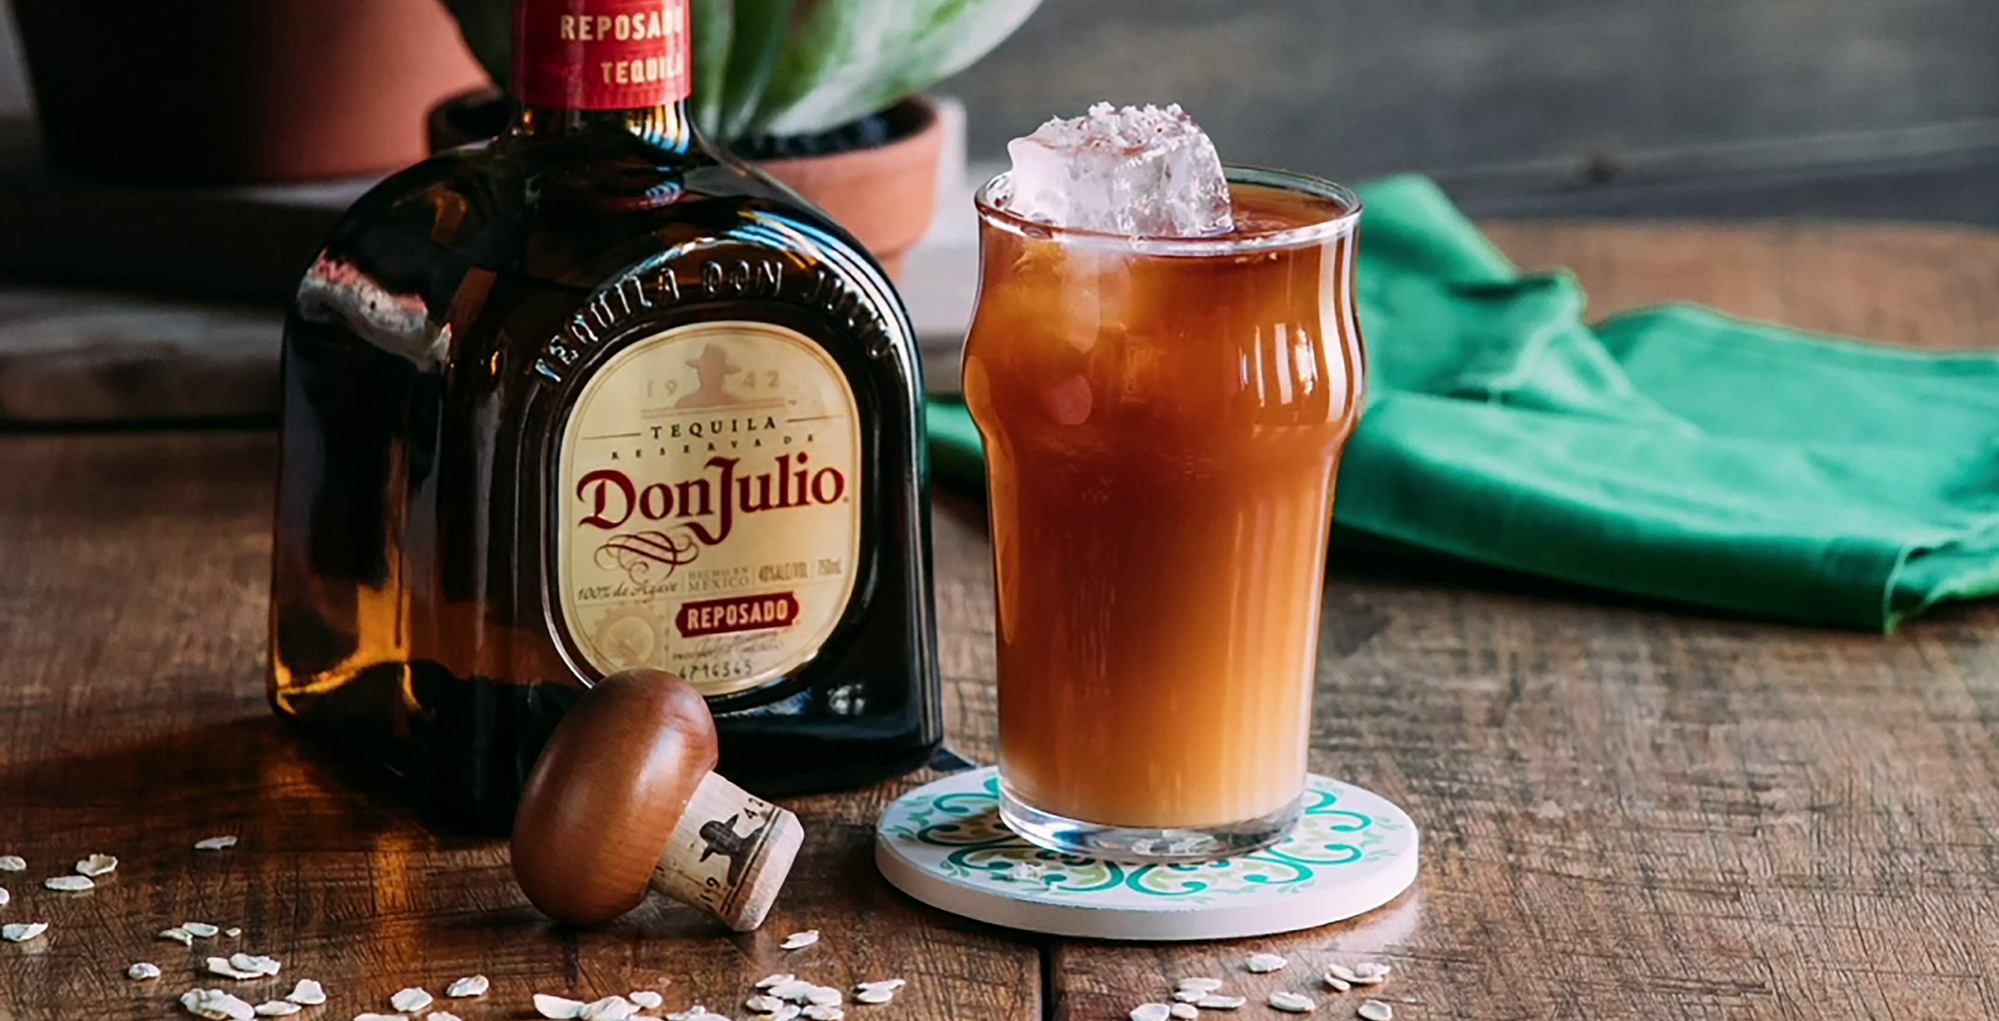 Repo Cold Brew cocktail made with Don Julio Reposado Tequila